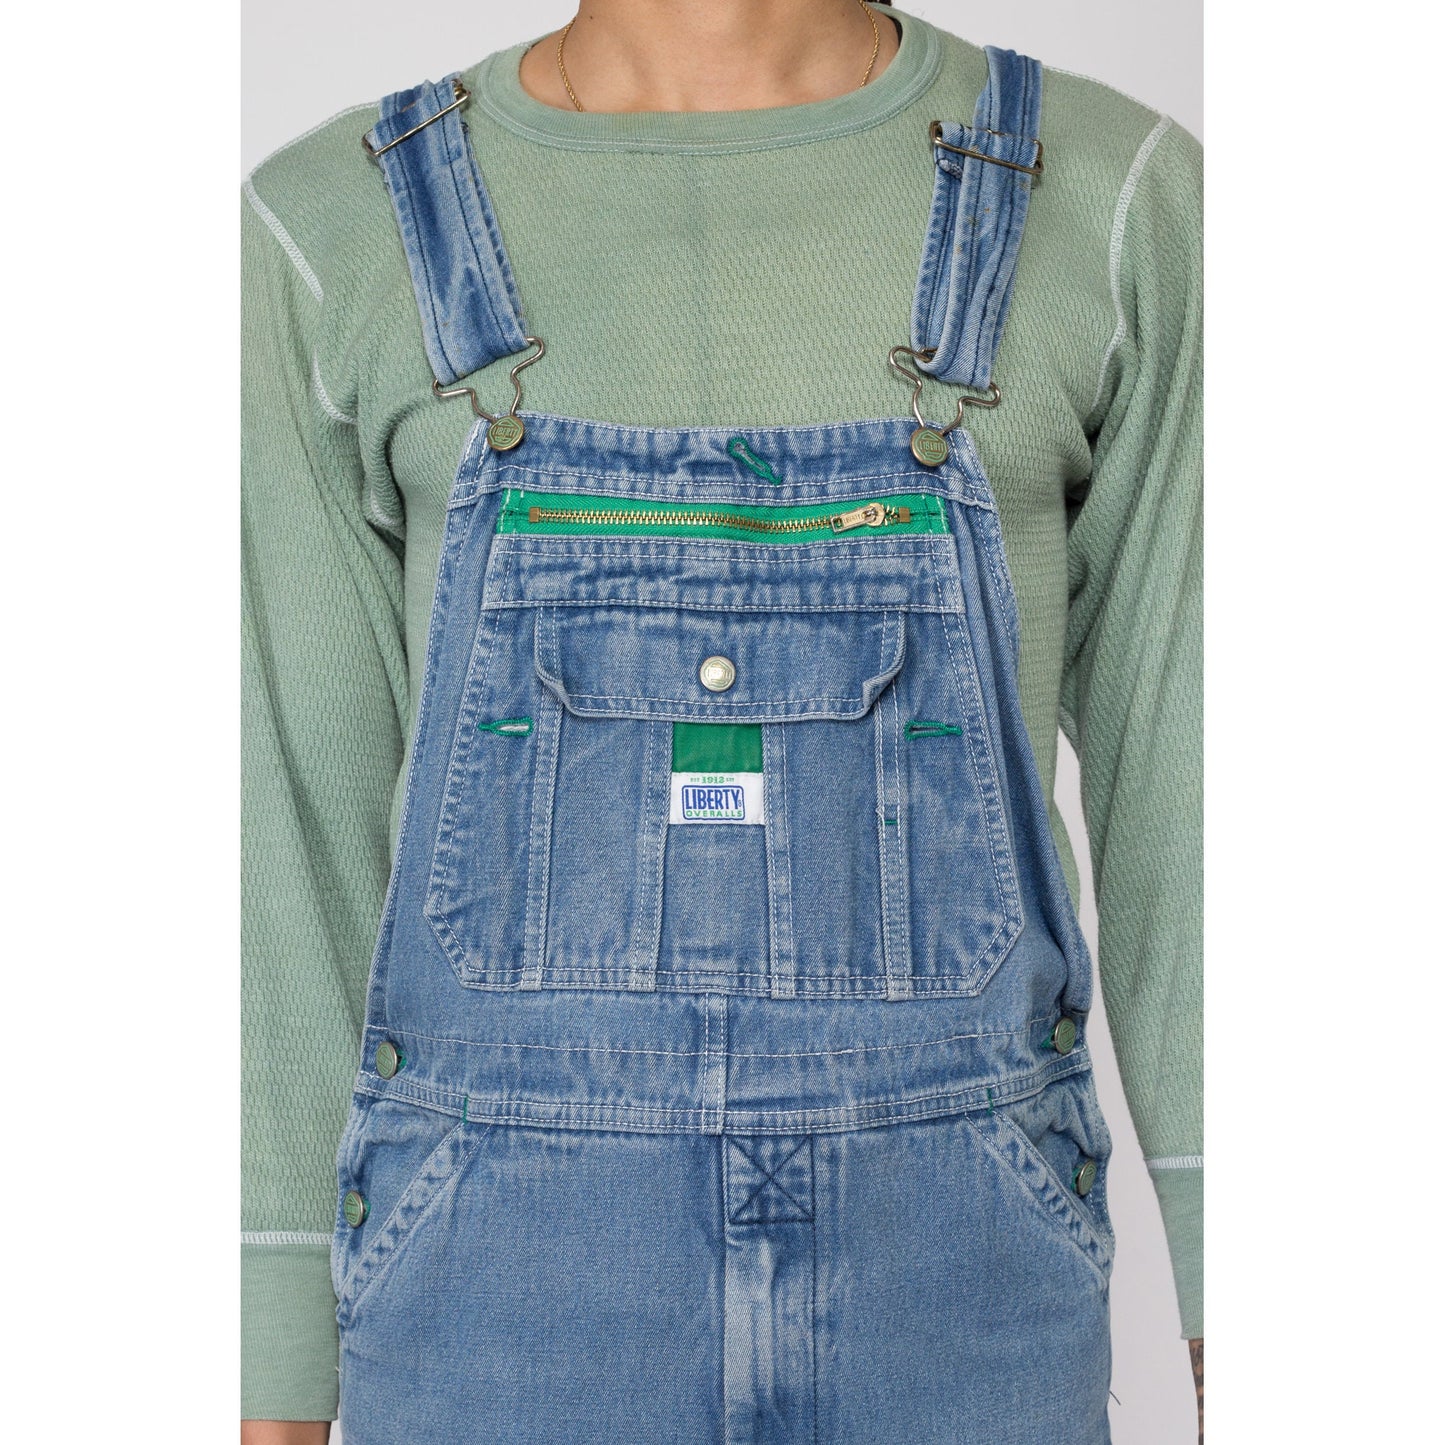 Medium 90s Liberty Overalls | Vintage Soft Faded Denim Overall Pants Baggy Blue Jean Dungarees